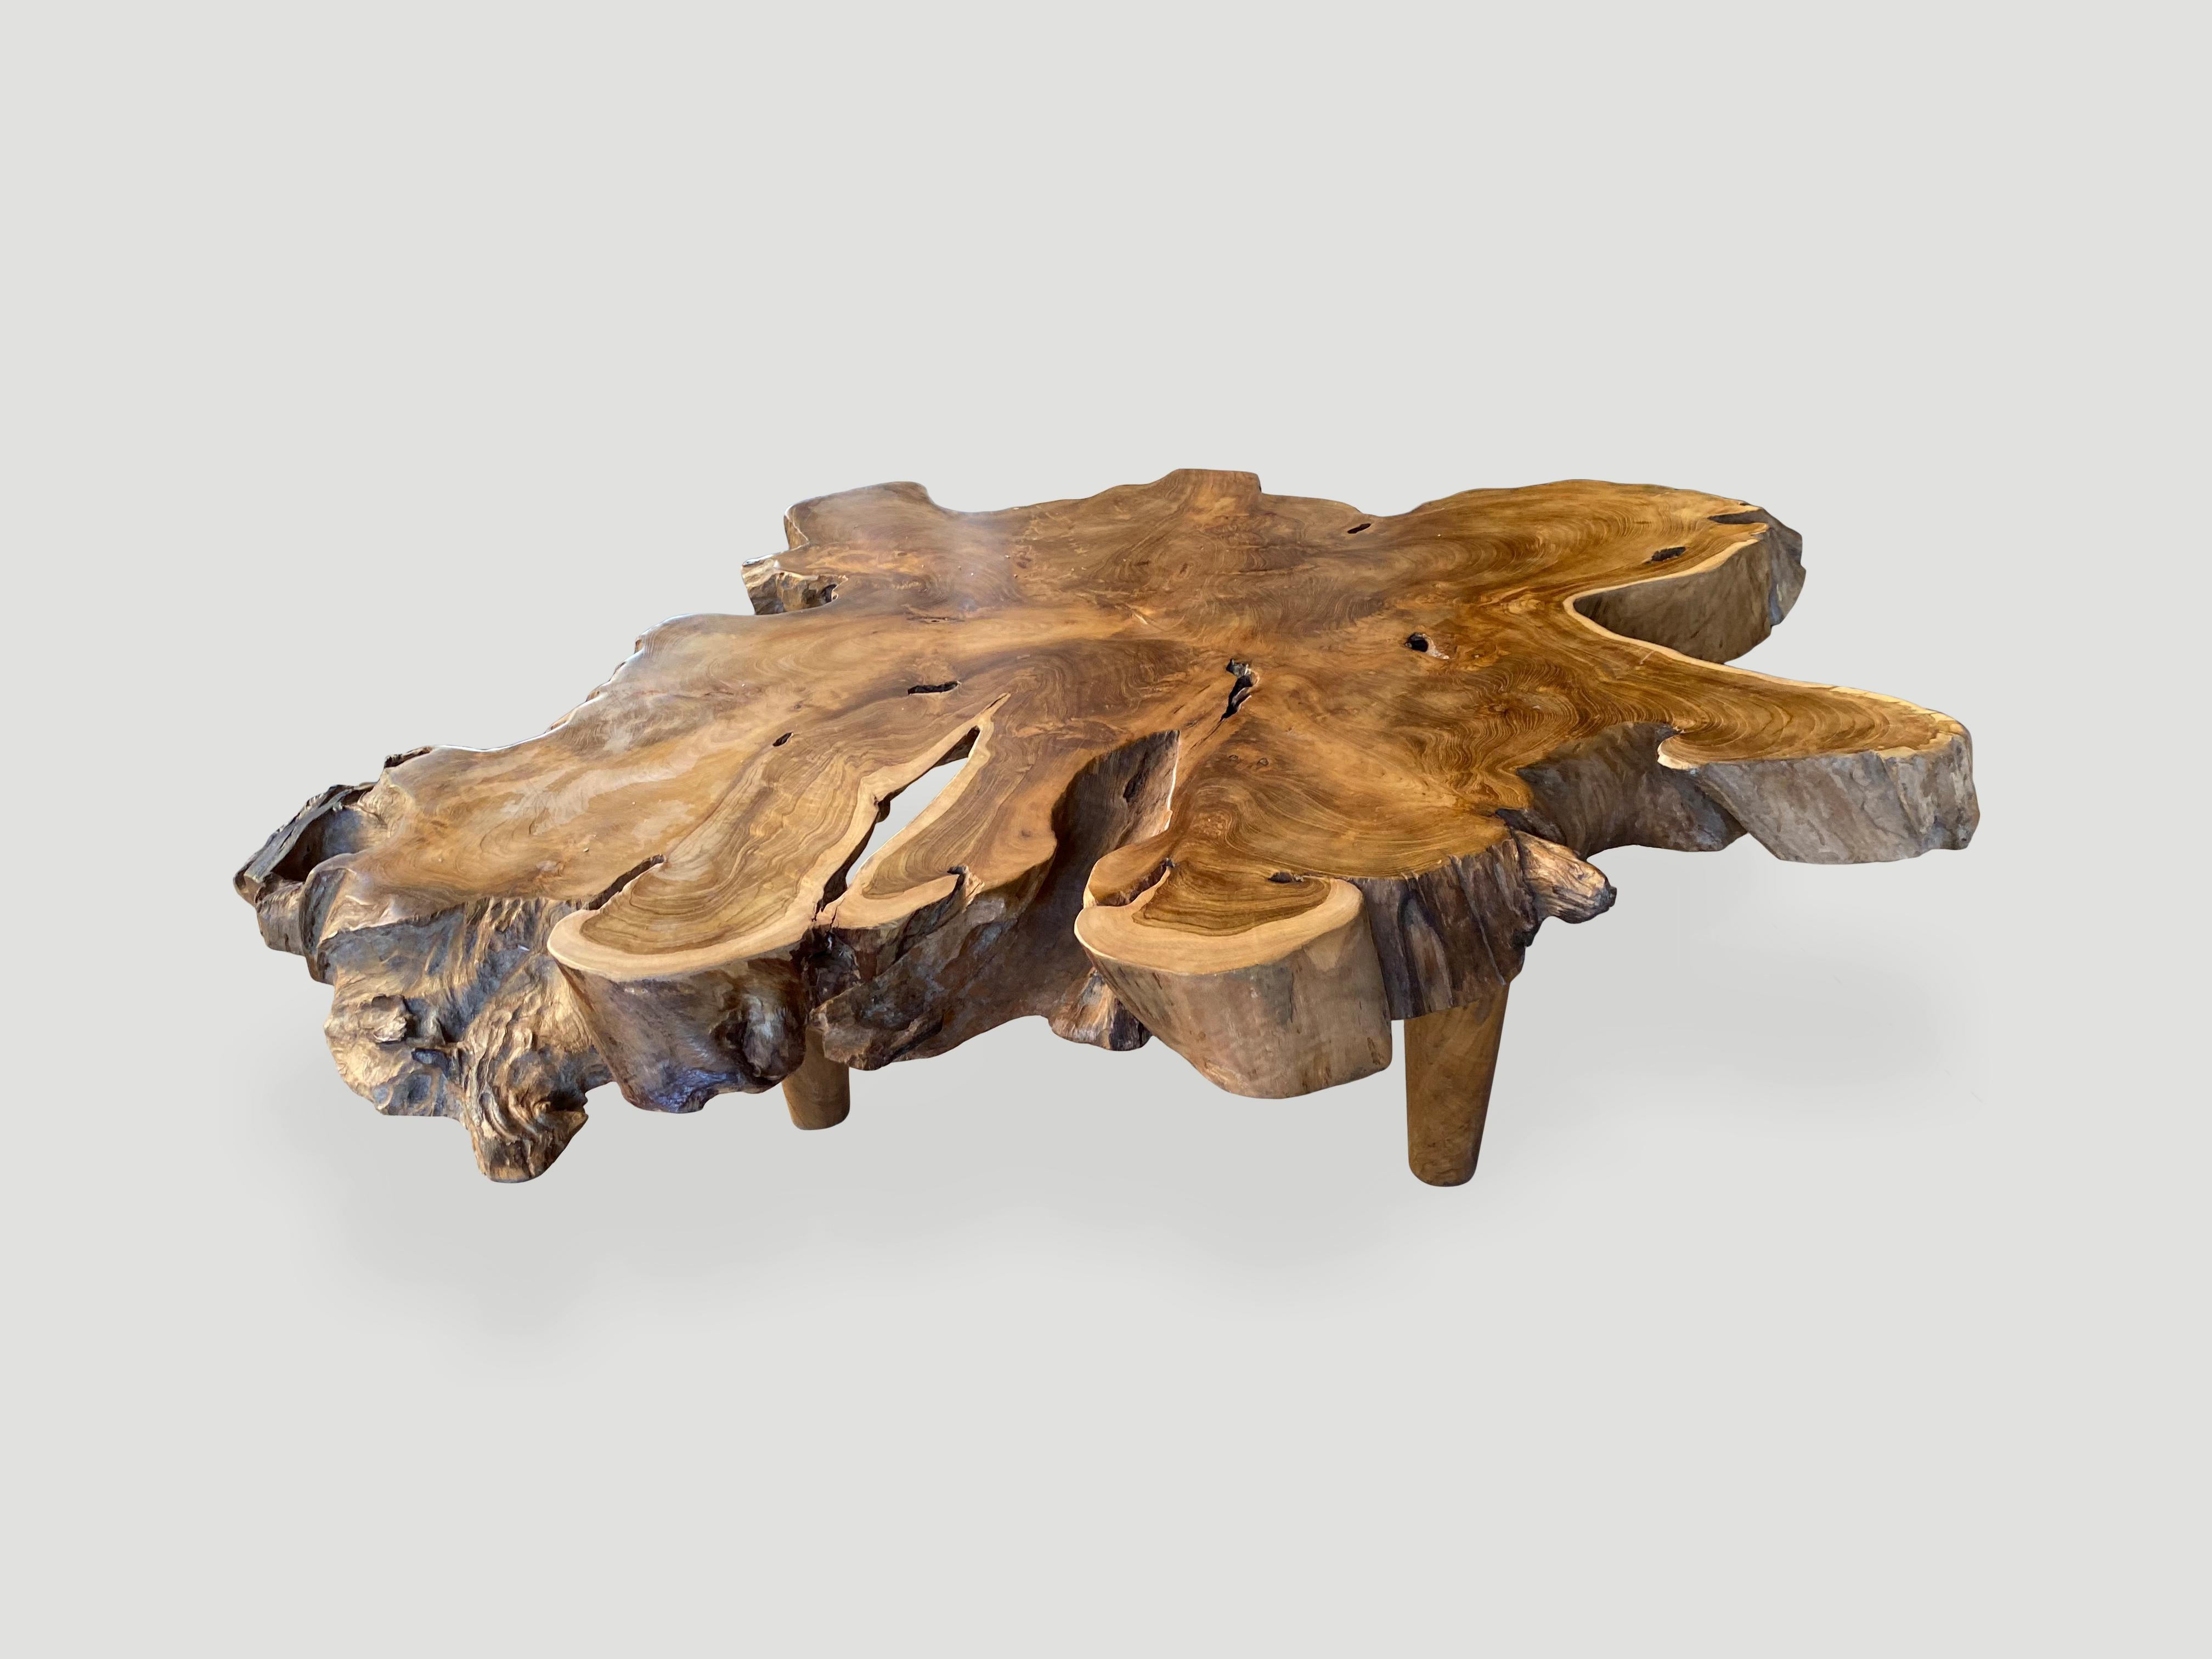 Impressive reclaimed four inch thick teak root coffee table. The top is polished with a natural oil finish and the sides left raw. Floating on mid century style cone shaped legs. Organic with a twist.

Own an Andrianna Shamaris